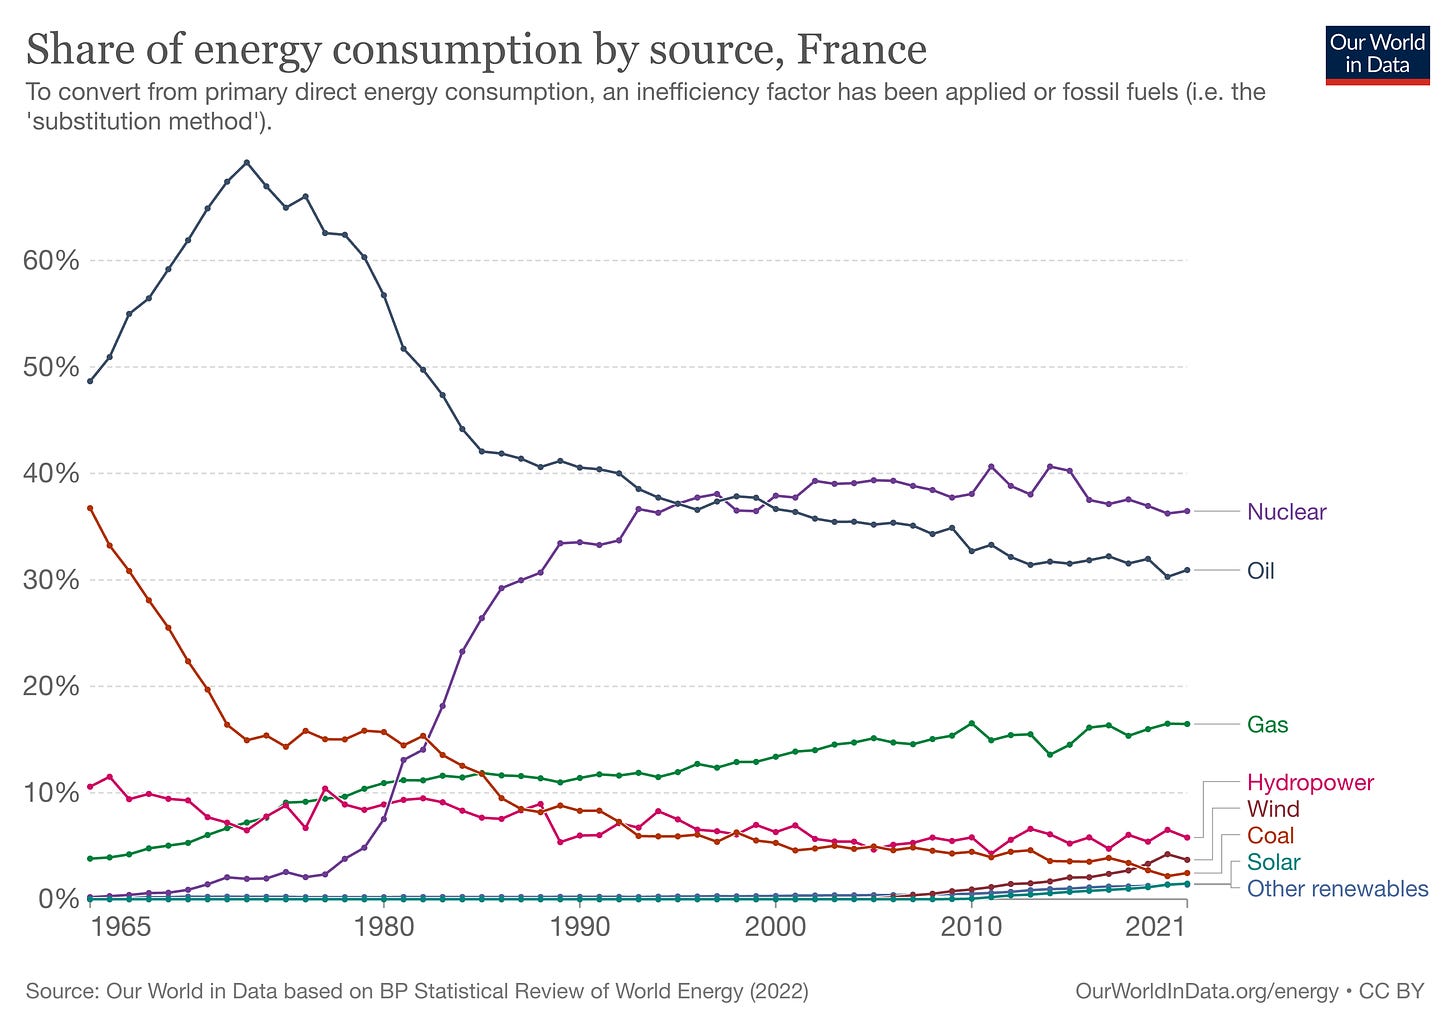 Source: https://ourworldindata.org/energy/country/france